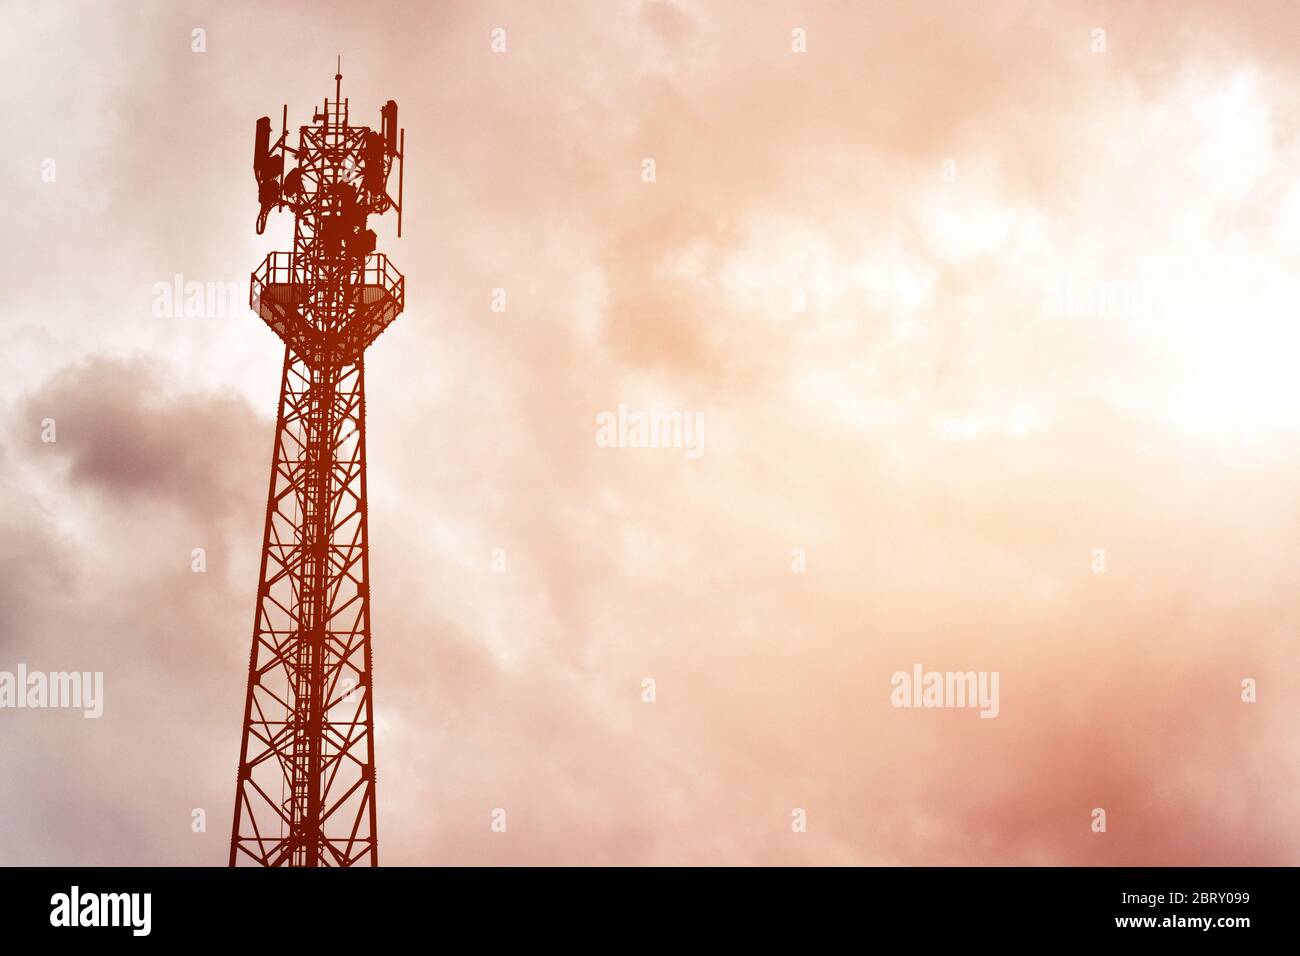 Silhouette signal antenna tower at sunset sky background. Silhouette the mobile communication antennas in evening sky Stock Photo